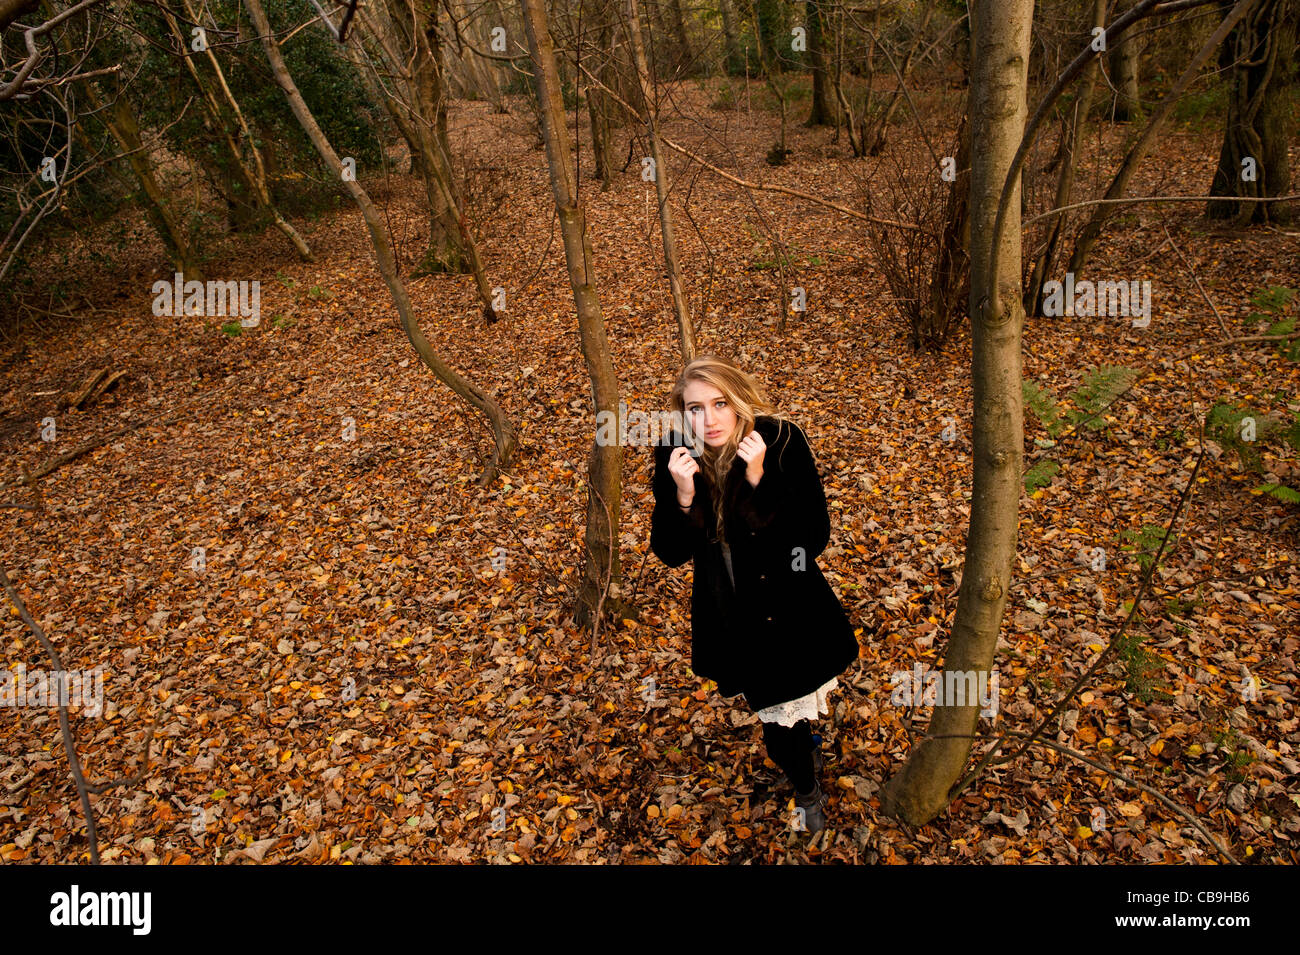 a slim blonde woman girl alone in woodland autumn afternoon daytime UK. looking scared frightened watched followed stalked Stock Photo